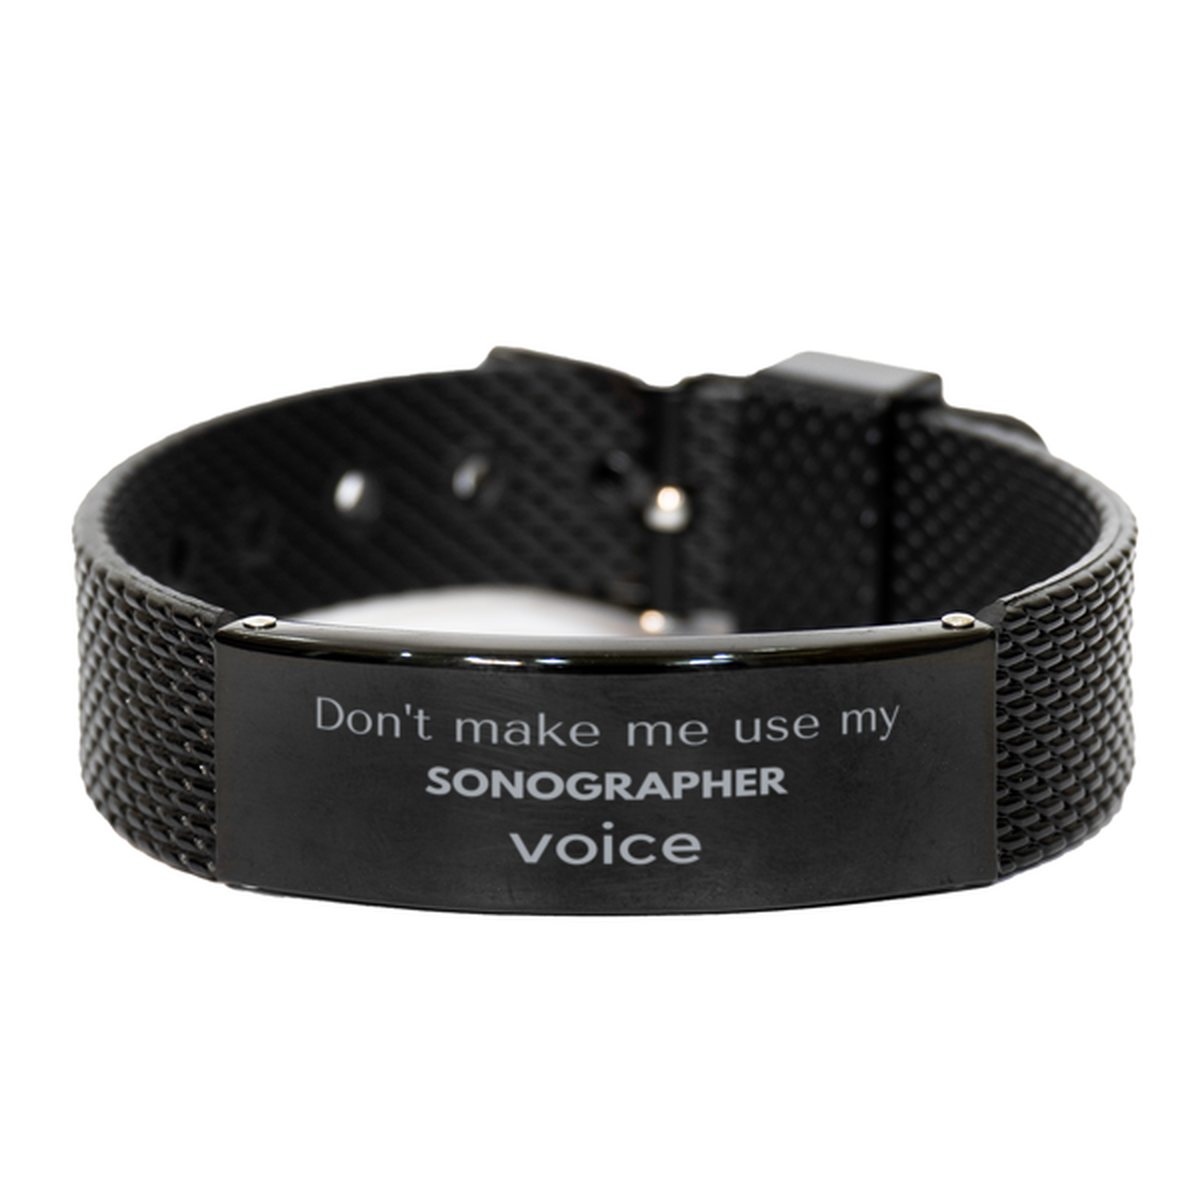 Don't make me use my Sonographer voice, Sarcasm Sonographer Gifts, Christmas Sonographer Black Shark Mesh Bracelet Birthday Unique Gifts For Sonographer Coworkers, Men, Women, Colleague, Friends